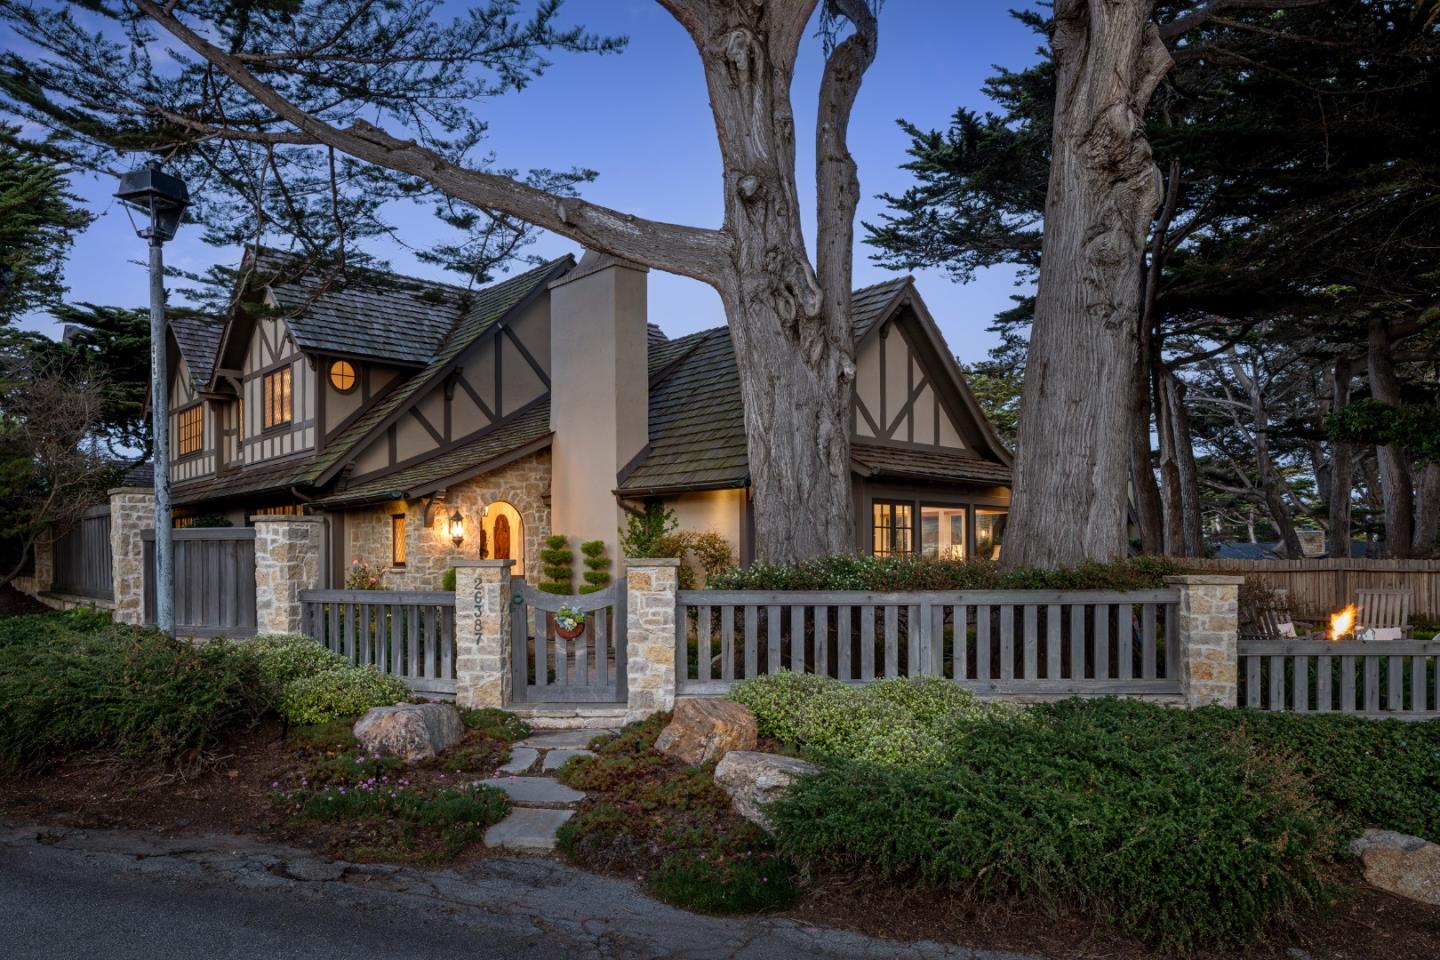 Photo of 26387 Isabella Ave in Carmel, CA